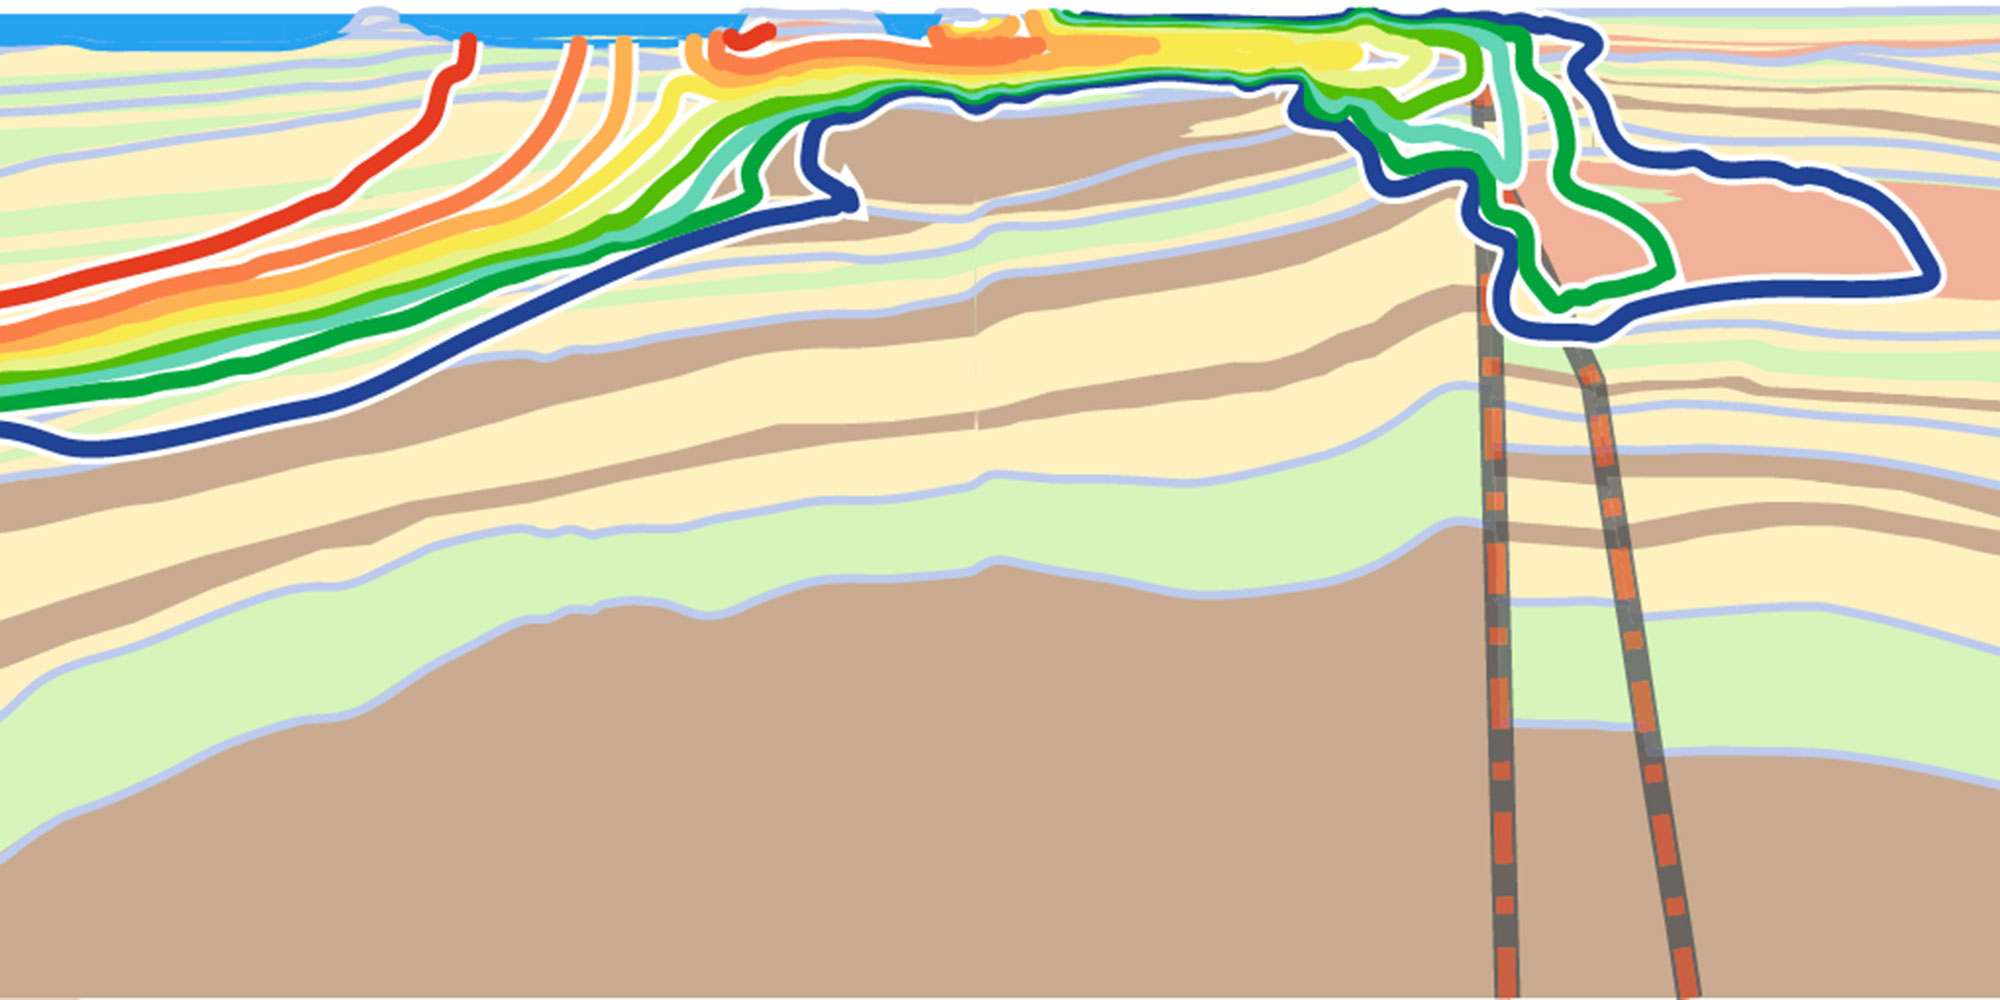 Contours of simulated chloride concentrations for 2004 in California